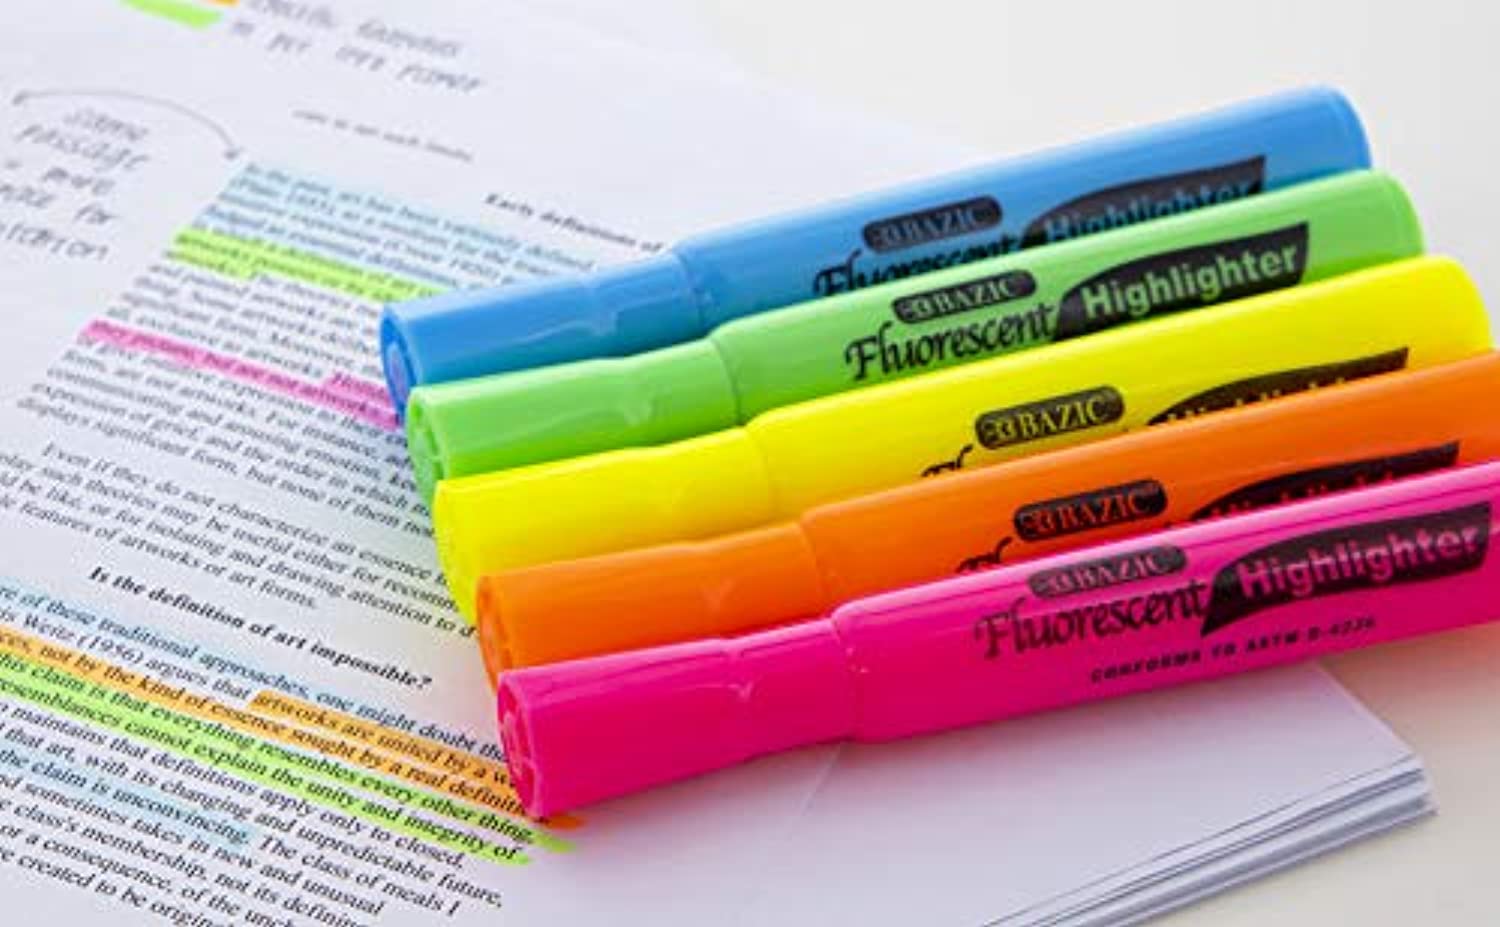 Assorted Colors Desk Style Neon Highlighters, Unscented Quick Dry (3/Pack)